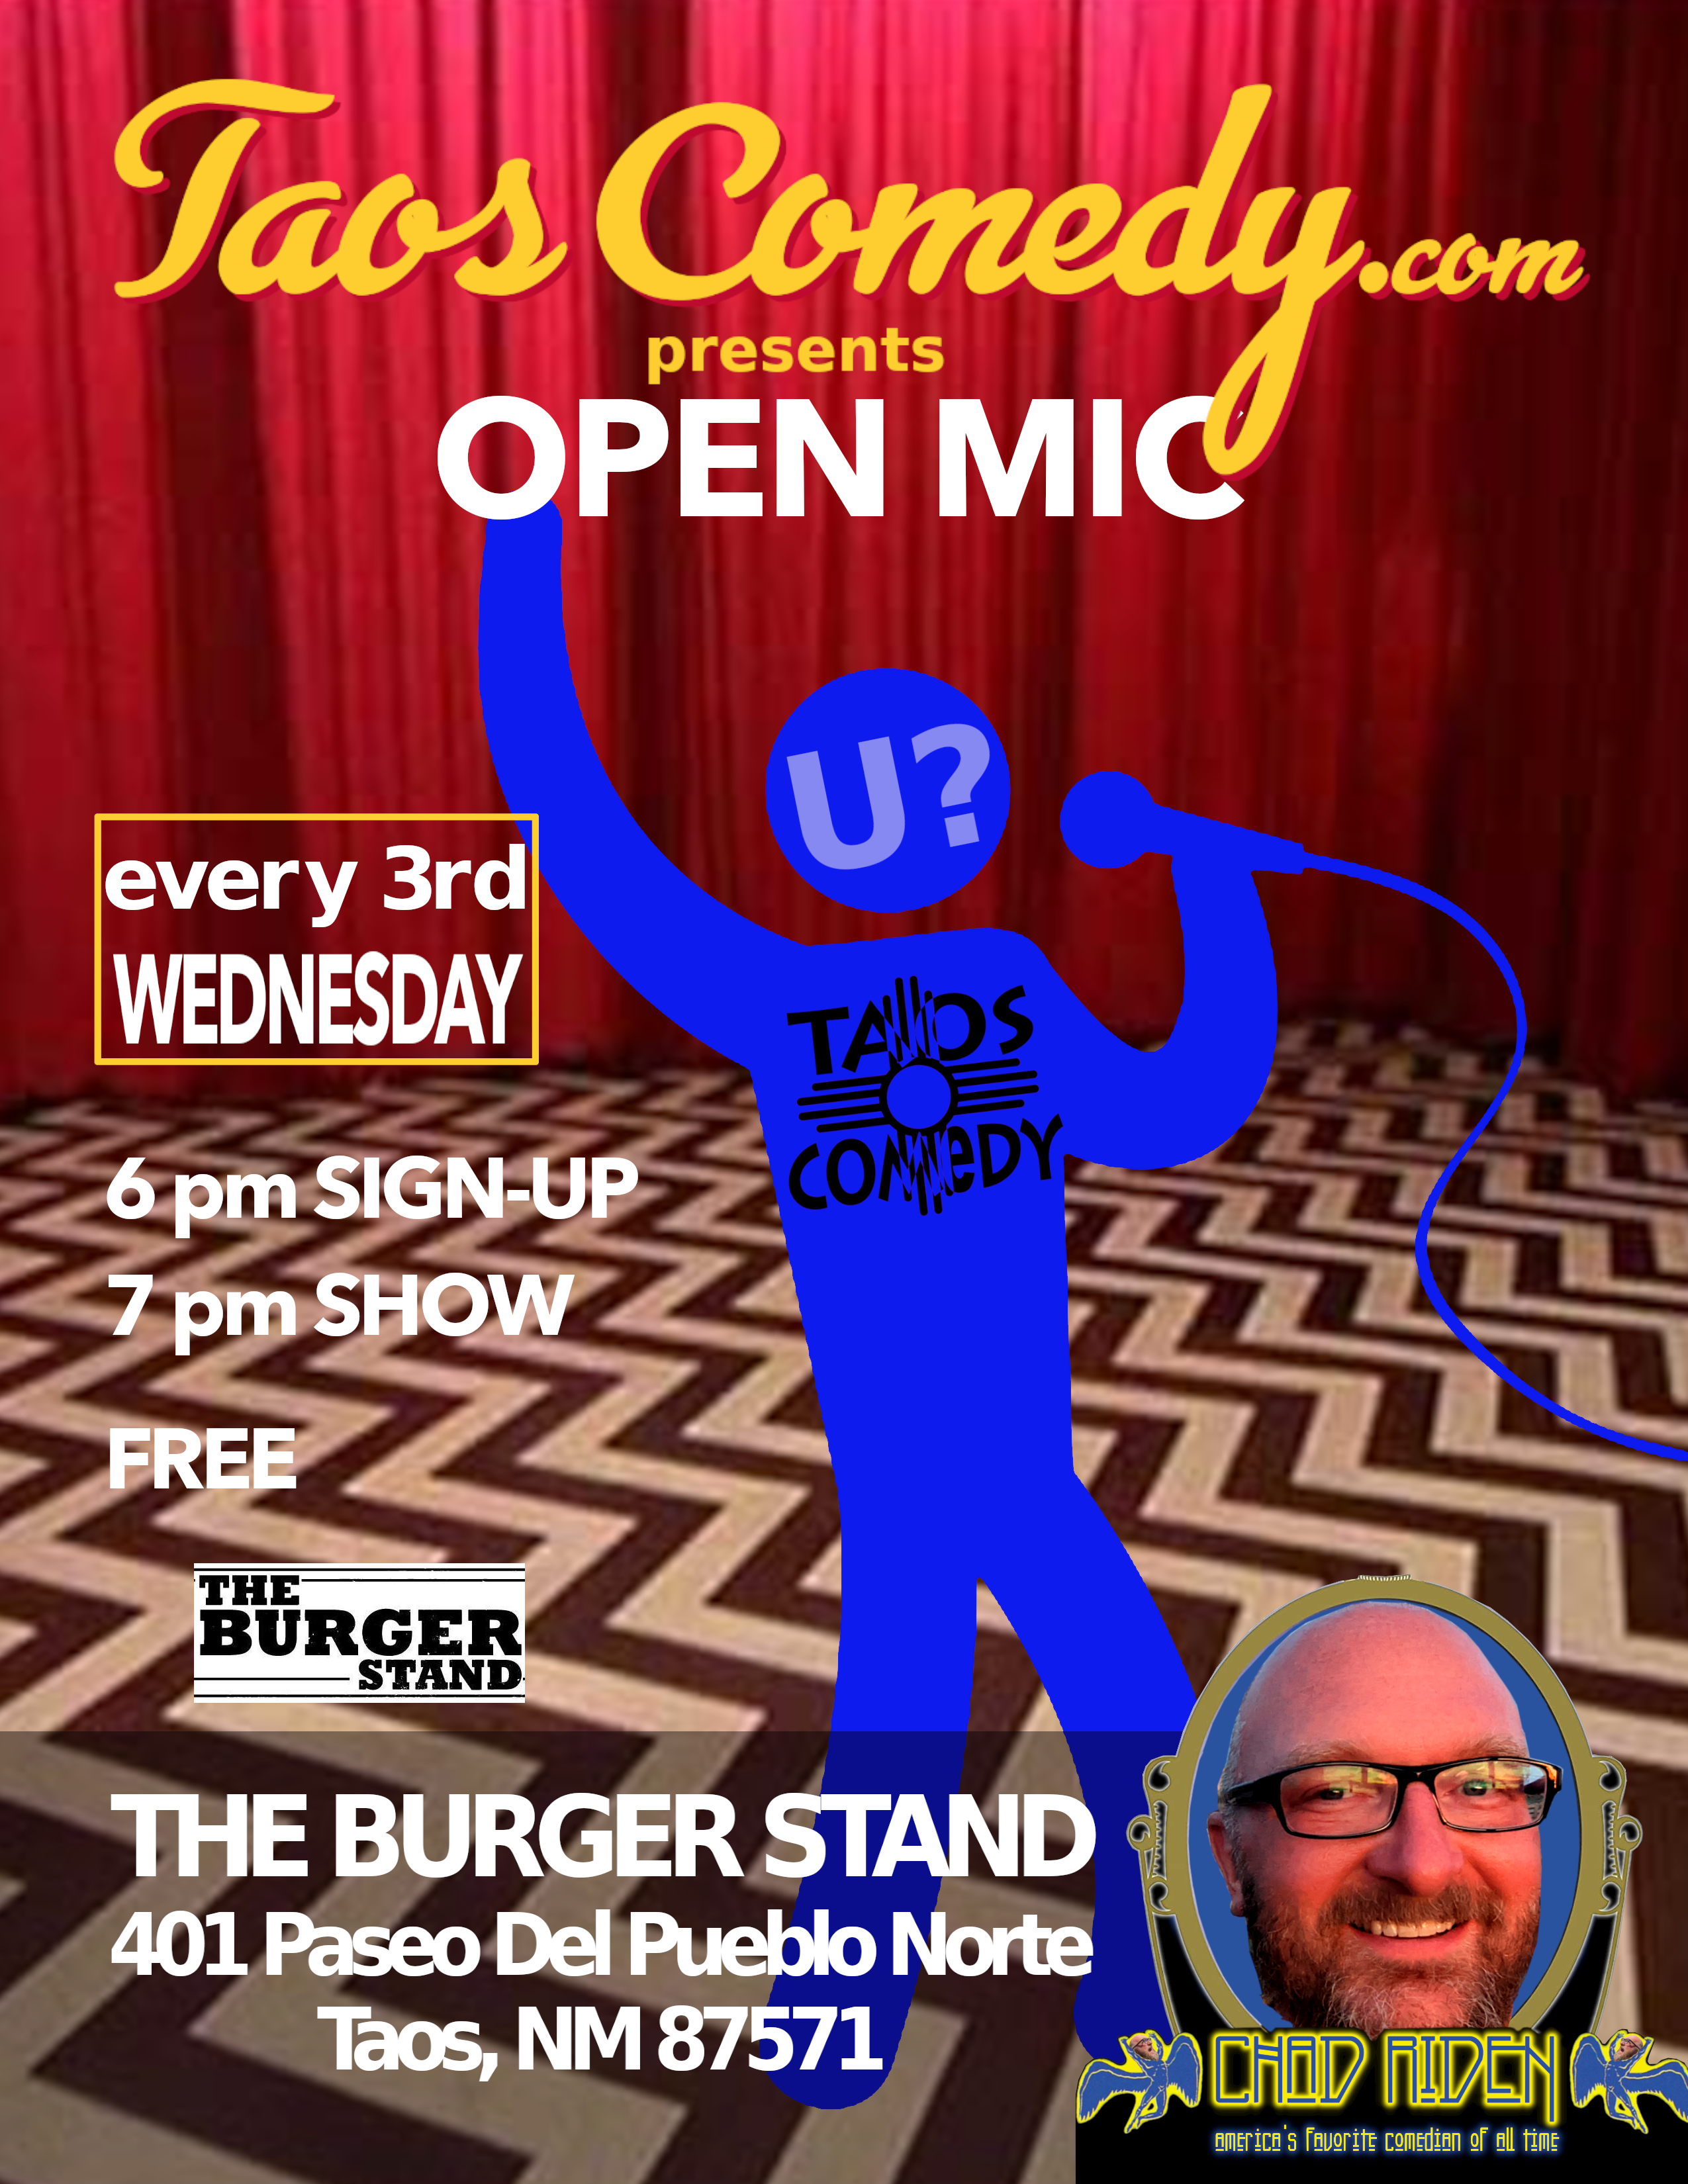 OPEN MIC stand-up comedy at The Burger Stand the 3rd Wednesday of every month.